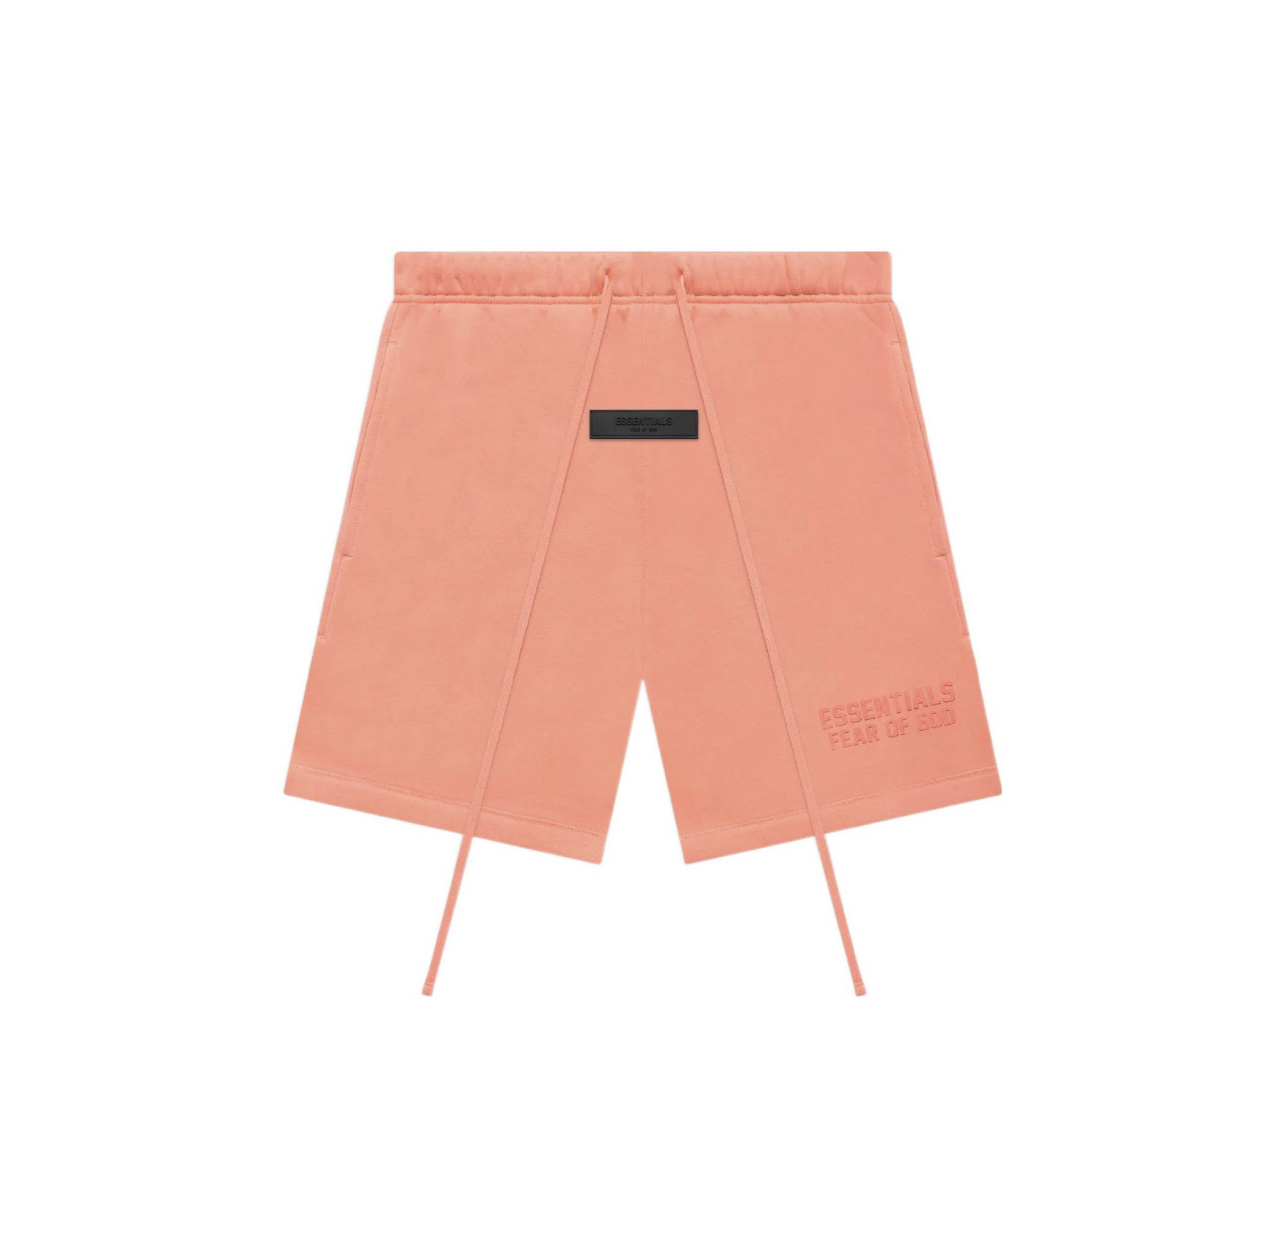 Essential Fear of God SS23 Coral Short